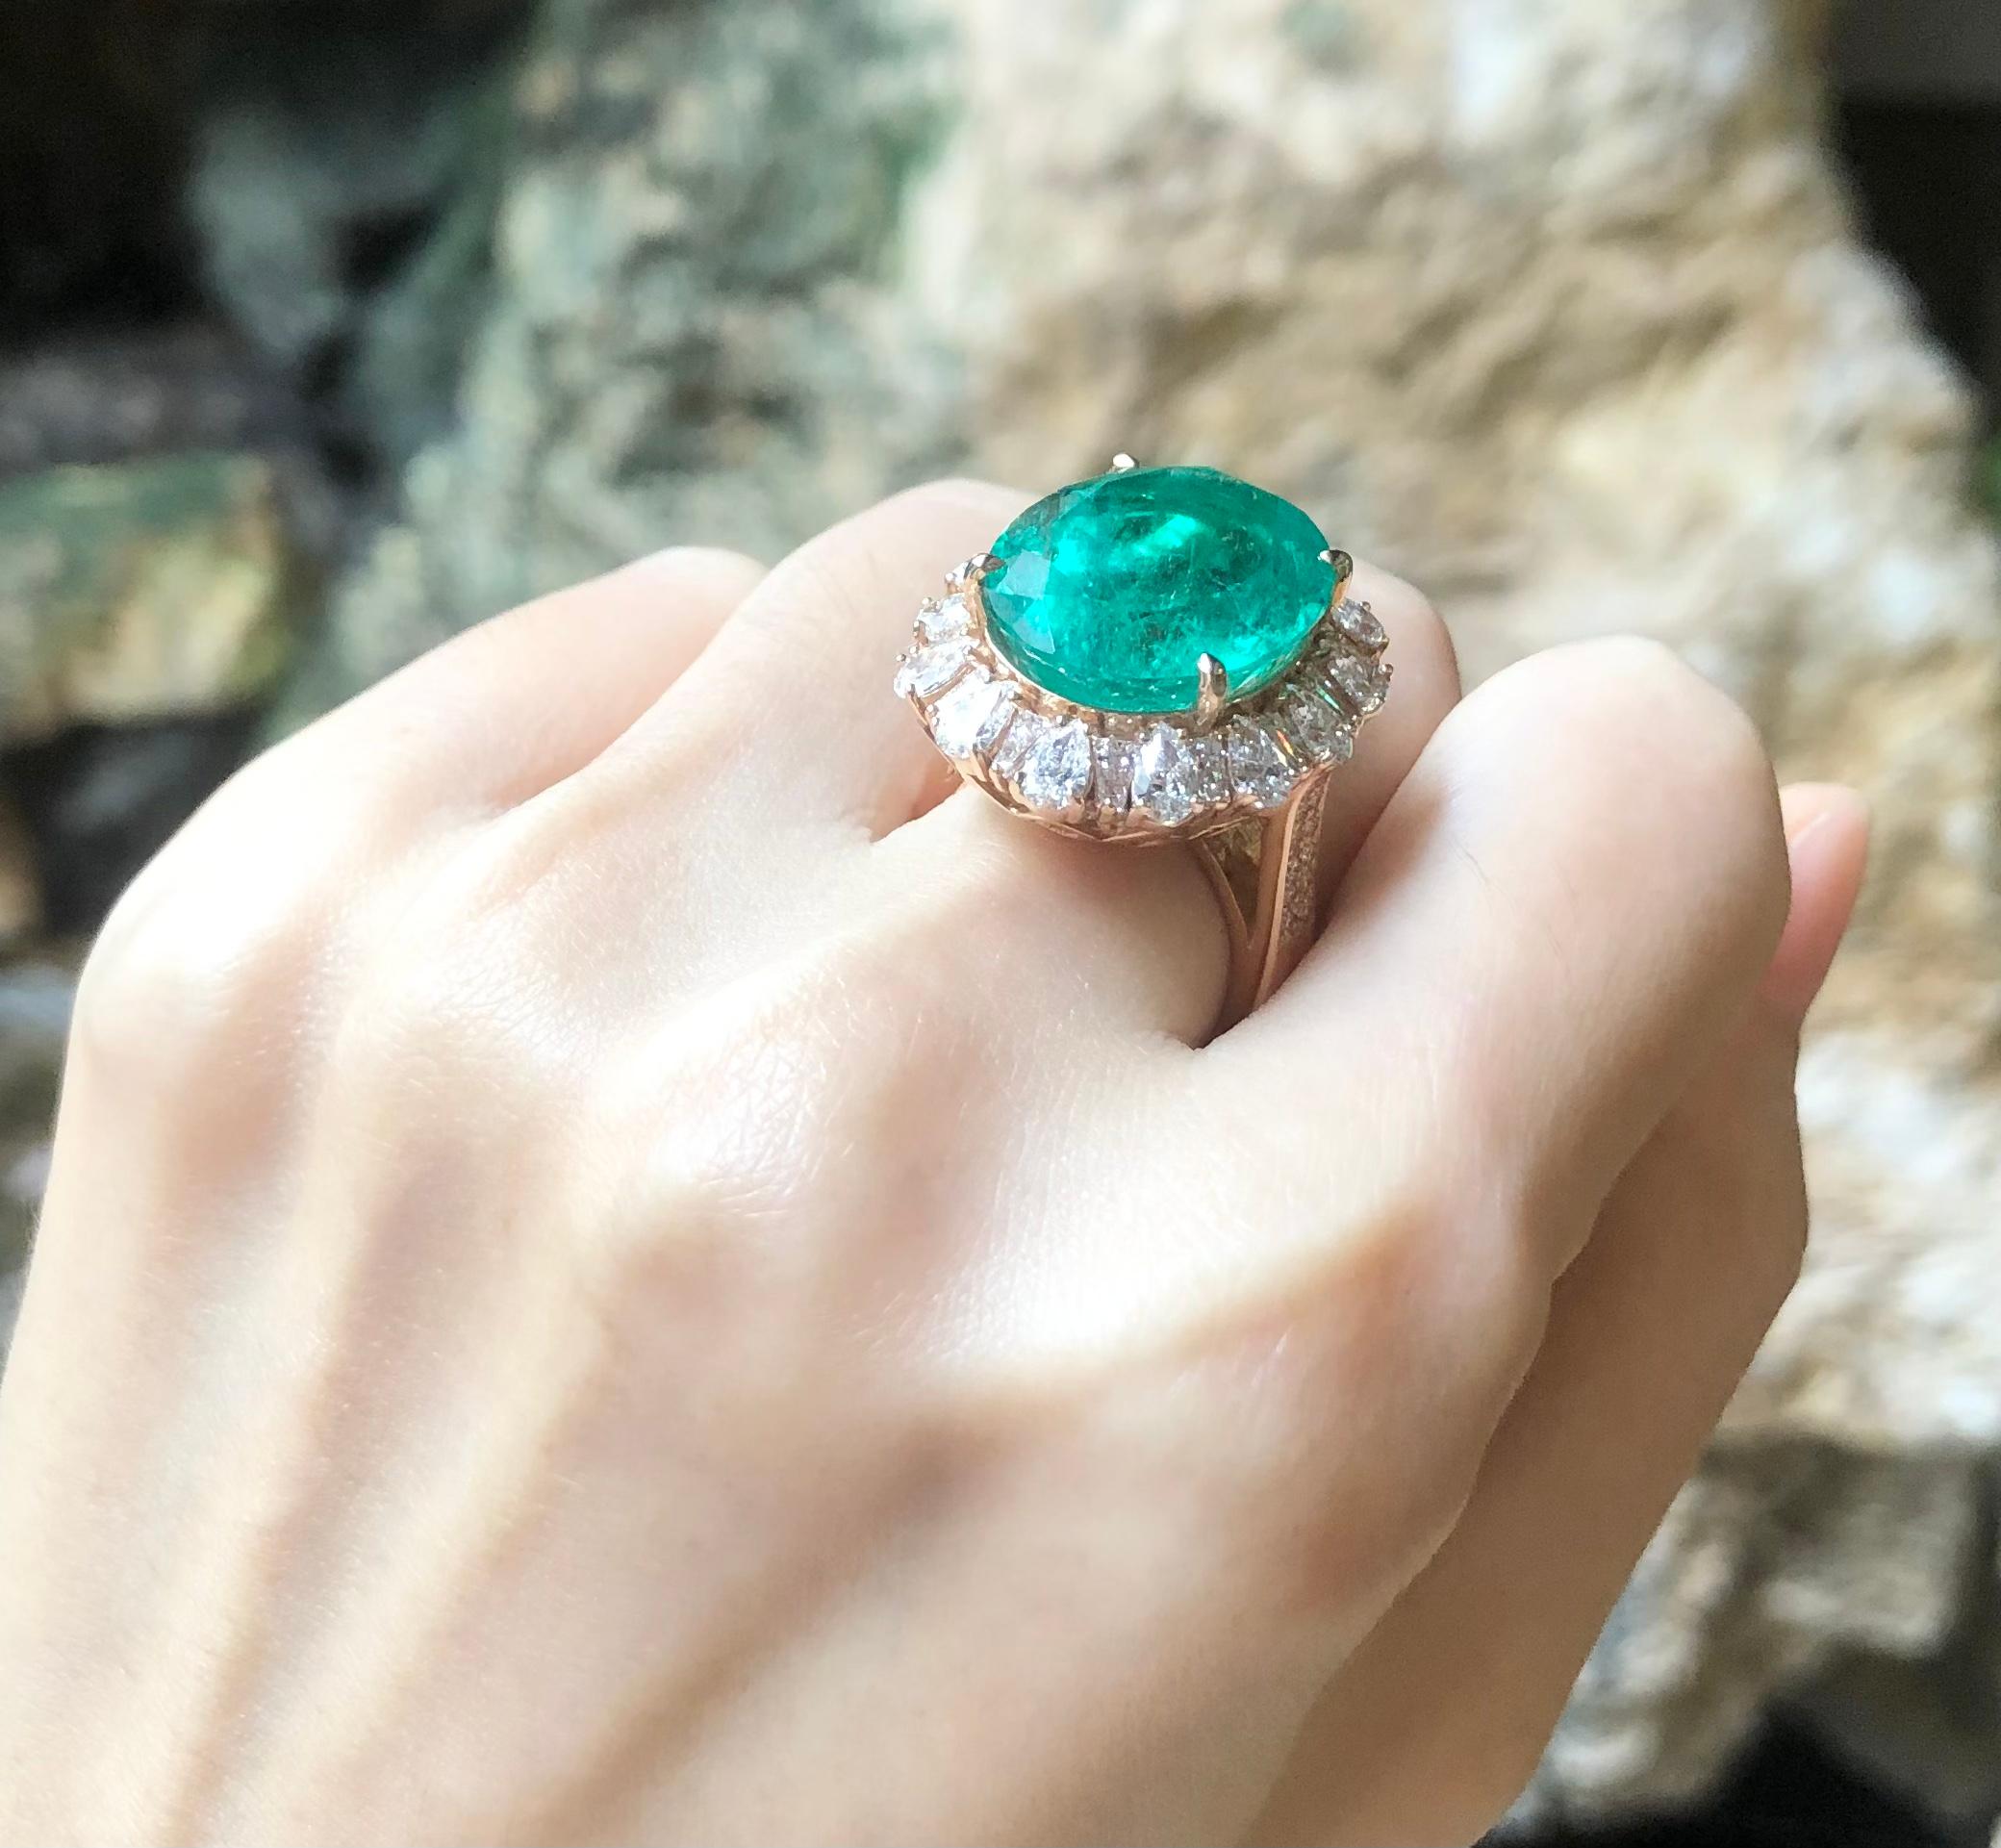 Emerald 15.52 carats with Diamond 2.51 carats Ring set in 18 Karat Rose Gold Settings
(GIA Certified)

Width:  2.0 cm 
Length: 2.5 cm
Ring Size: 53
Total Weight: 19.48  grams

Emerald
Width:  1.5 cm 
Length: 1.9 cm


